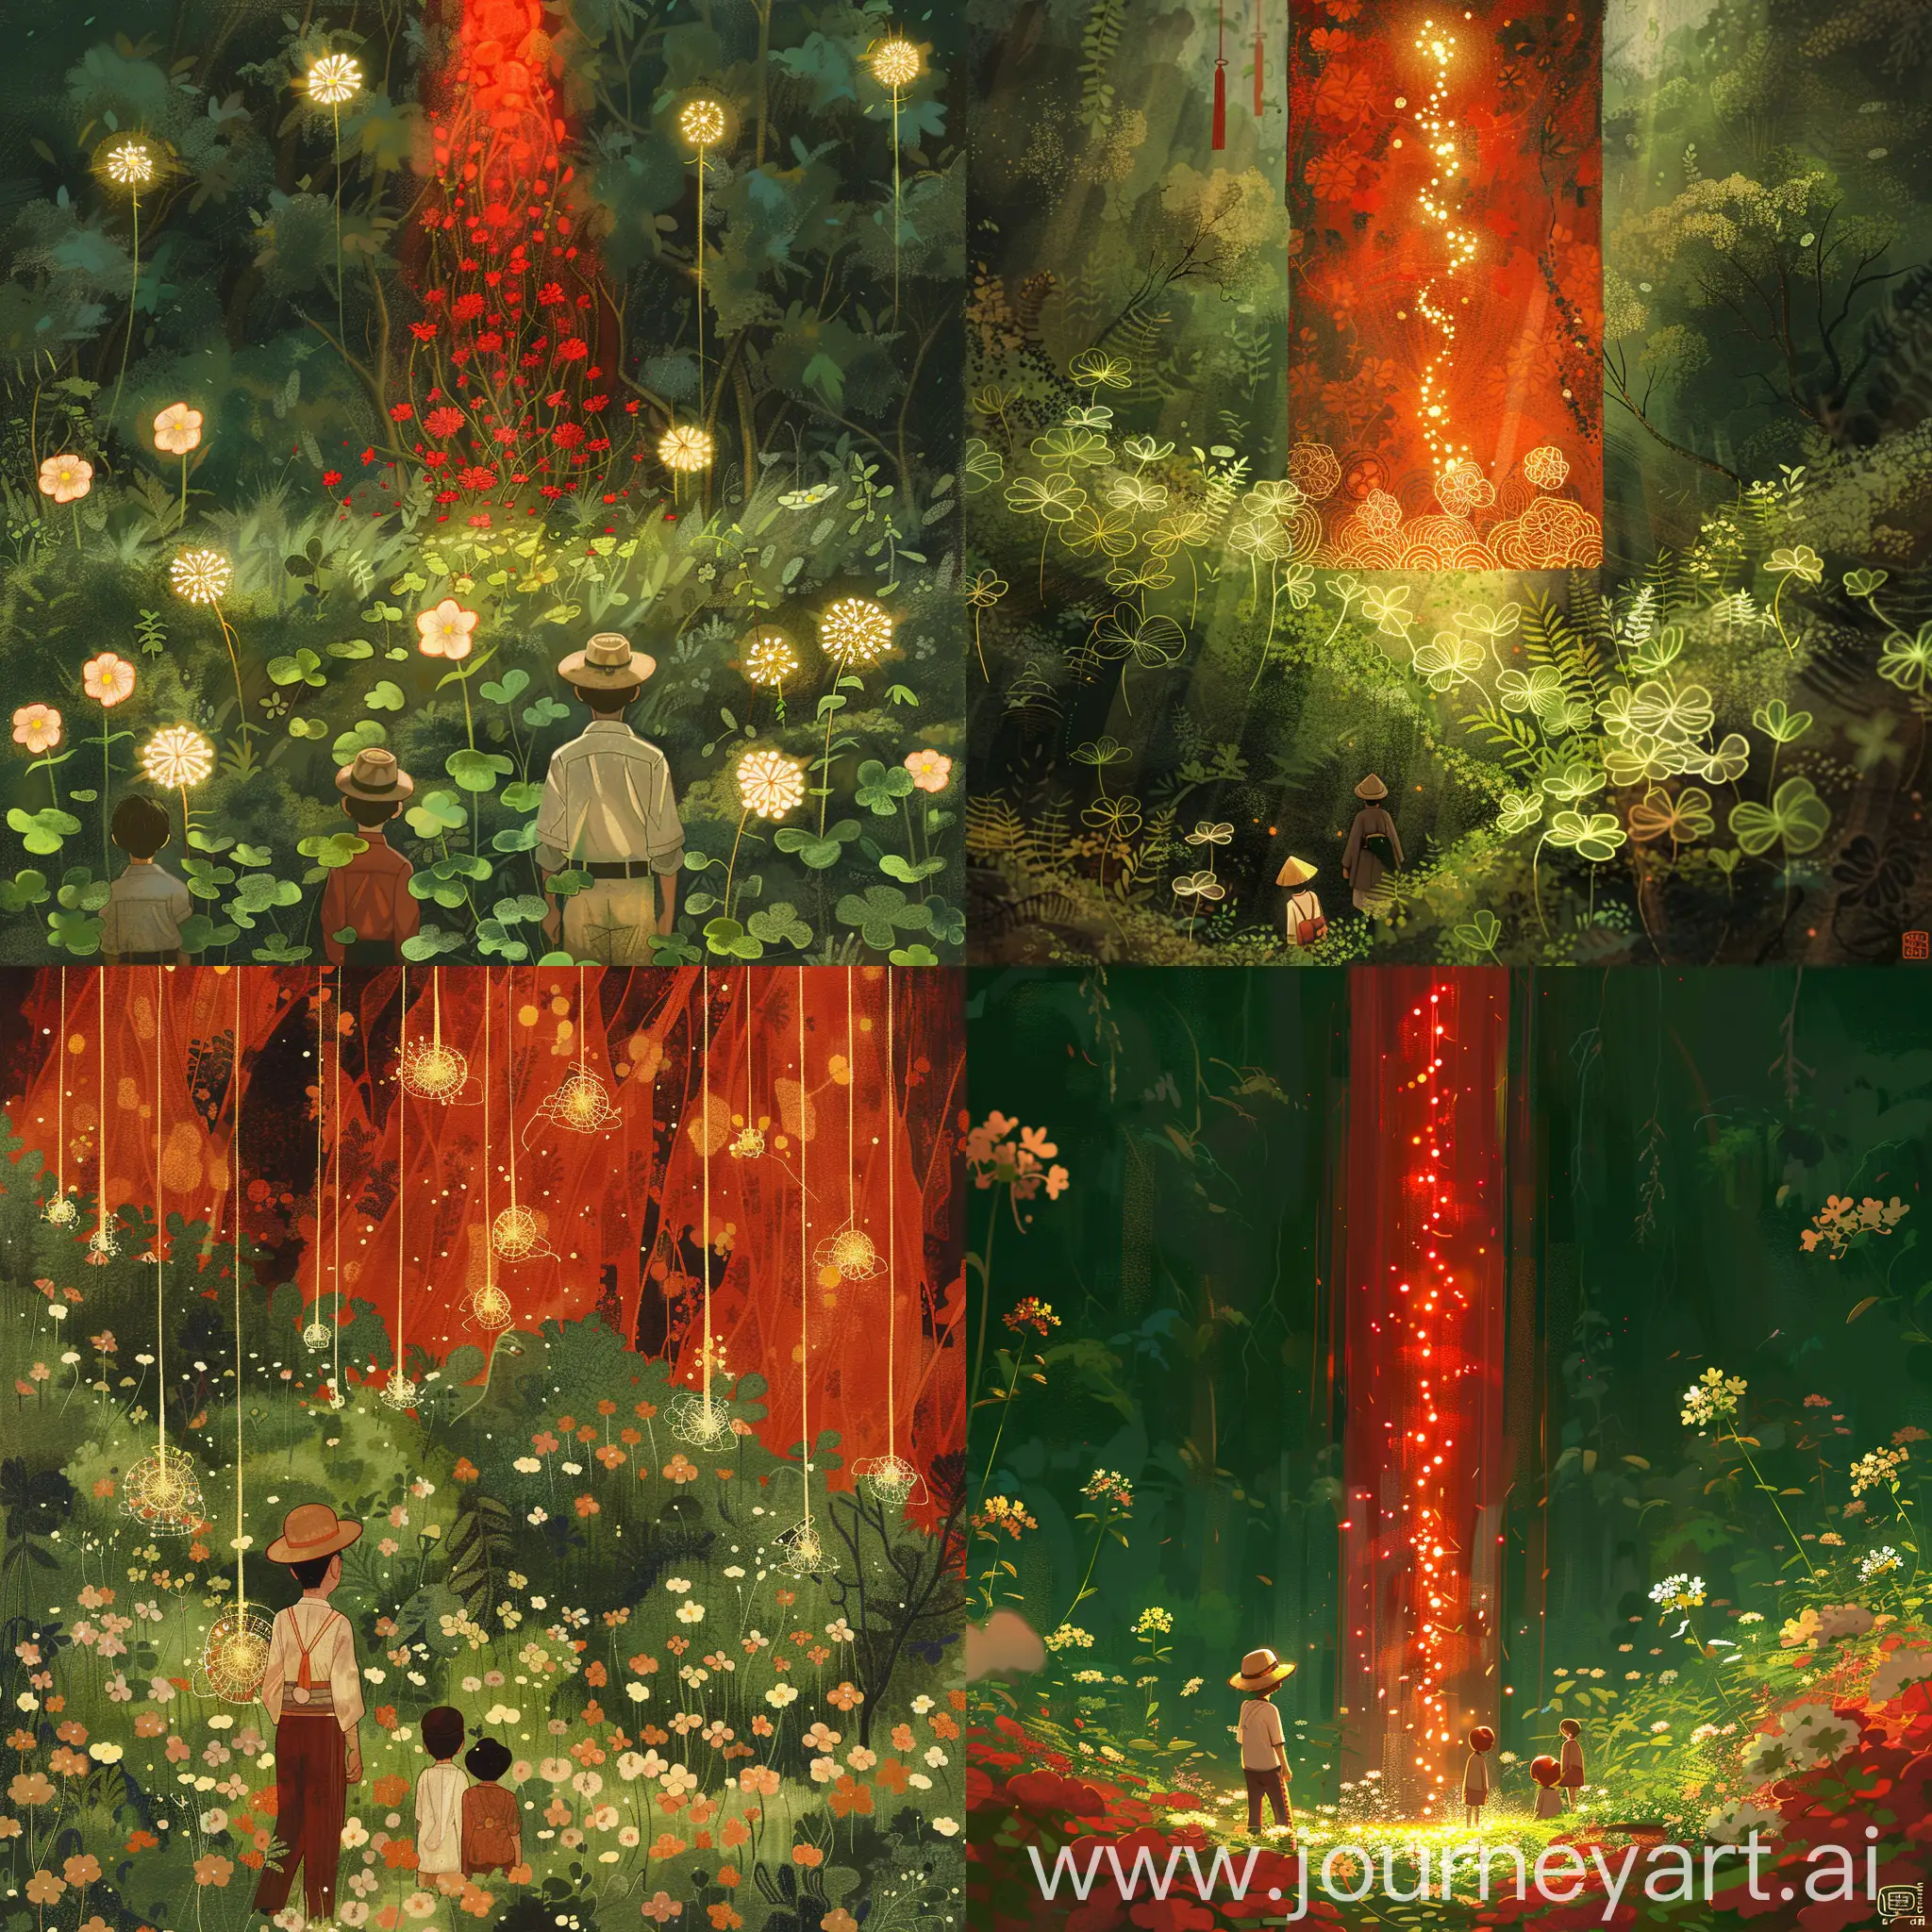 an illustration forest exploration a japan on outdoor hat a man with a 2boys, looking ((clover flowers beam lights))(zoom up), clover flowers fields, in the style of white gold molten filigree and red, confessional, playful and whimsical designs, notable sense of movement, i can't believe how beautiful this is, high-angle, hanging scroll